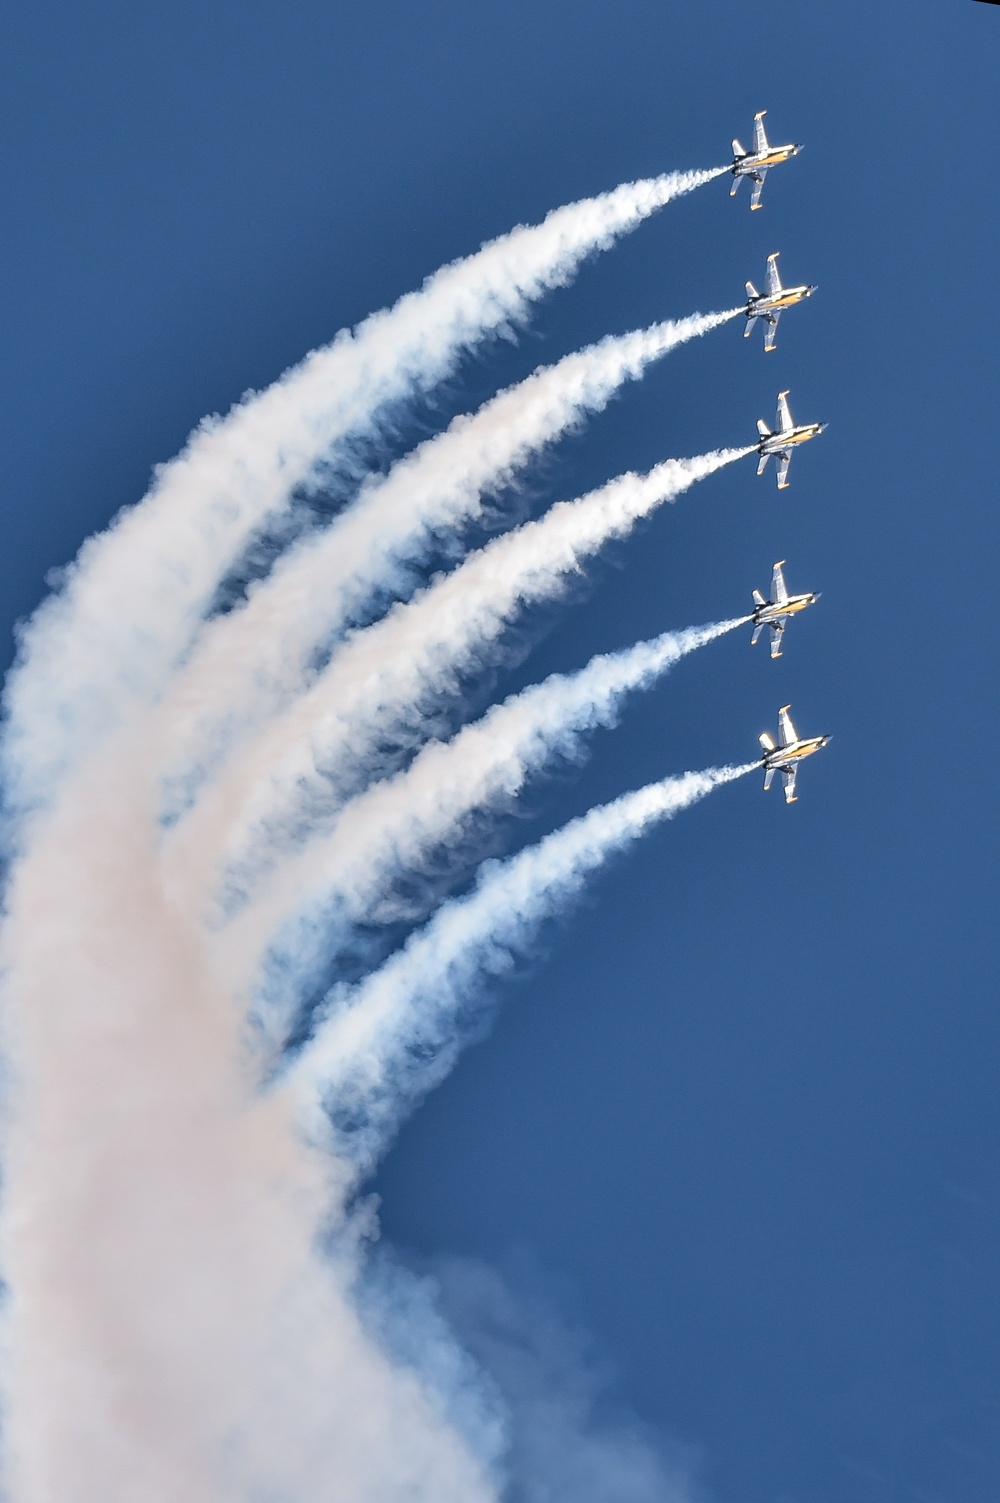 Blue Angels Perform in Sacramento